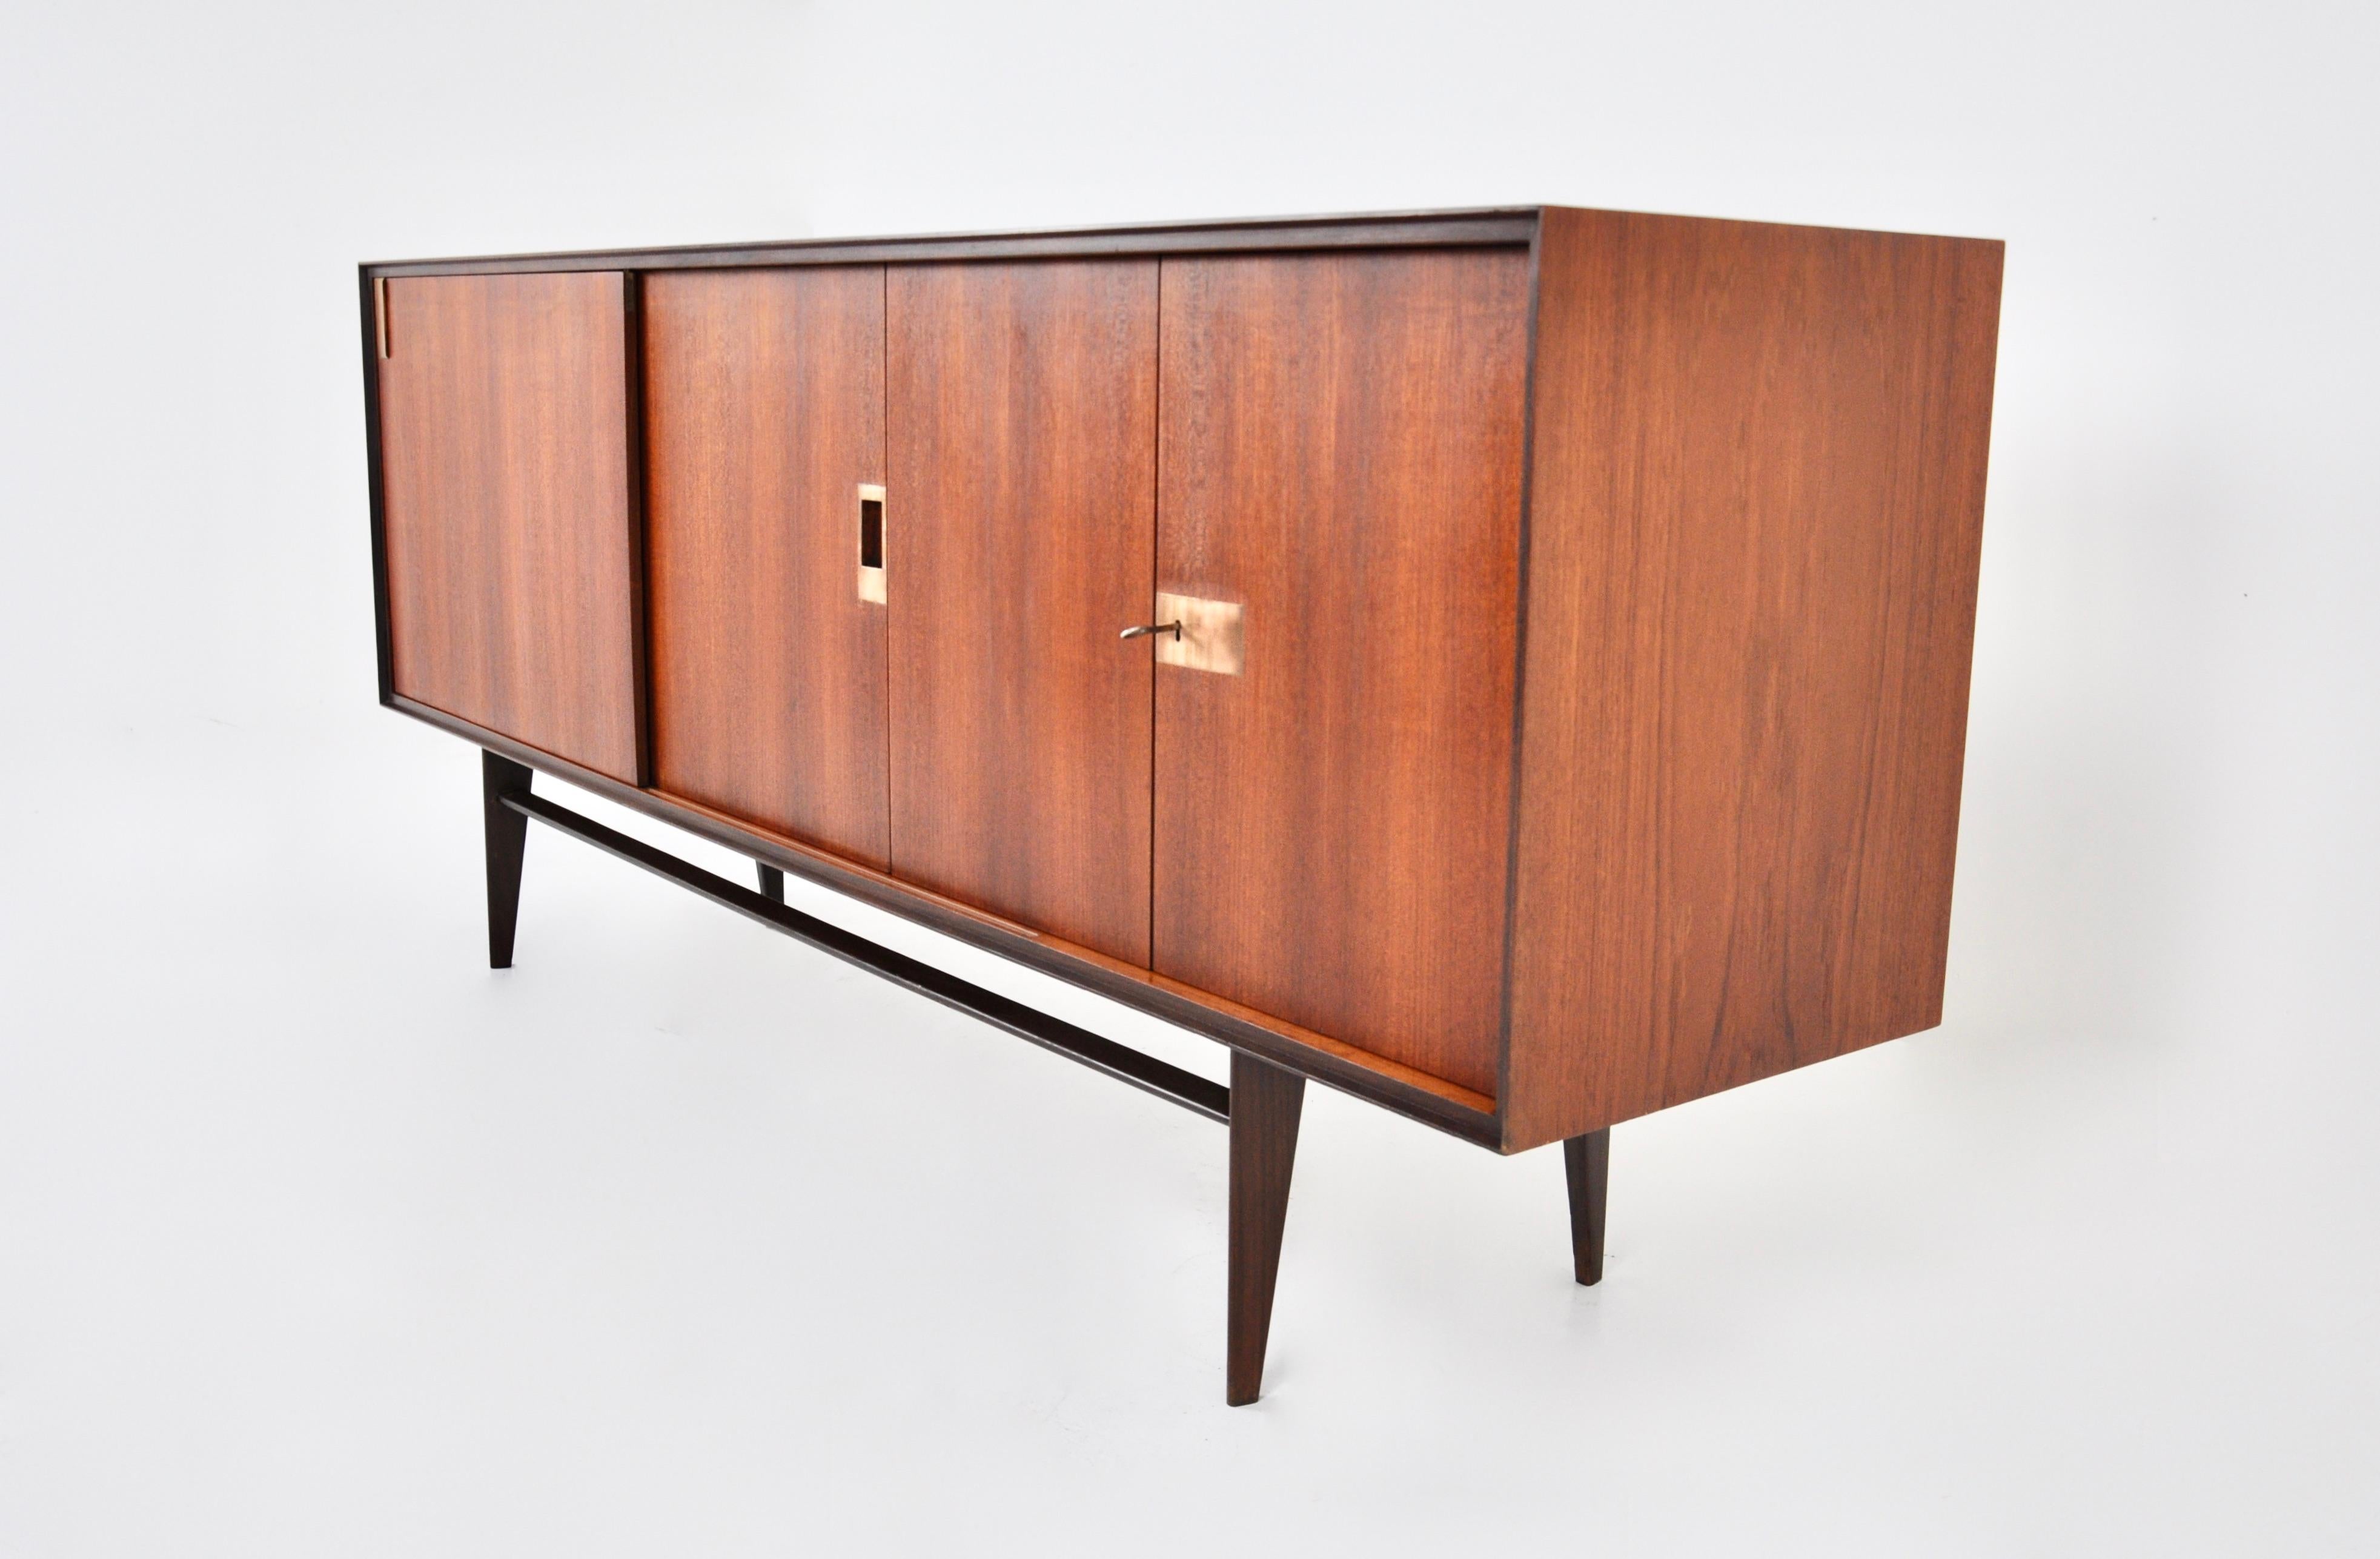 Sideboard by Edmondo Palutari for Dassi Mobili Moderni, 1960s In Good Condition For Sale In Lasne, BE